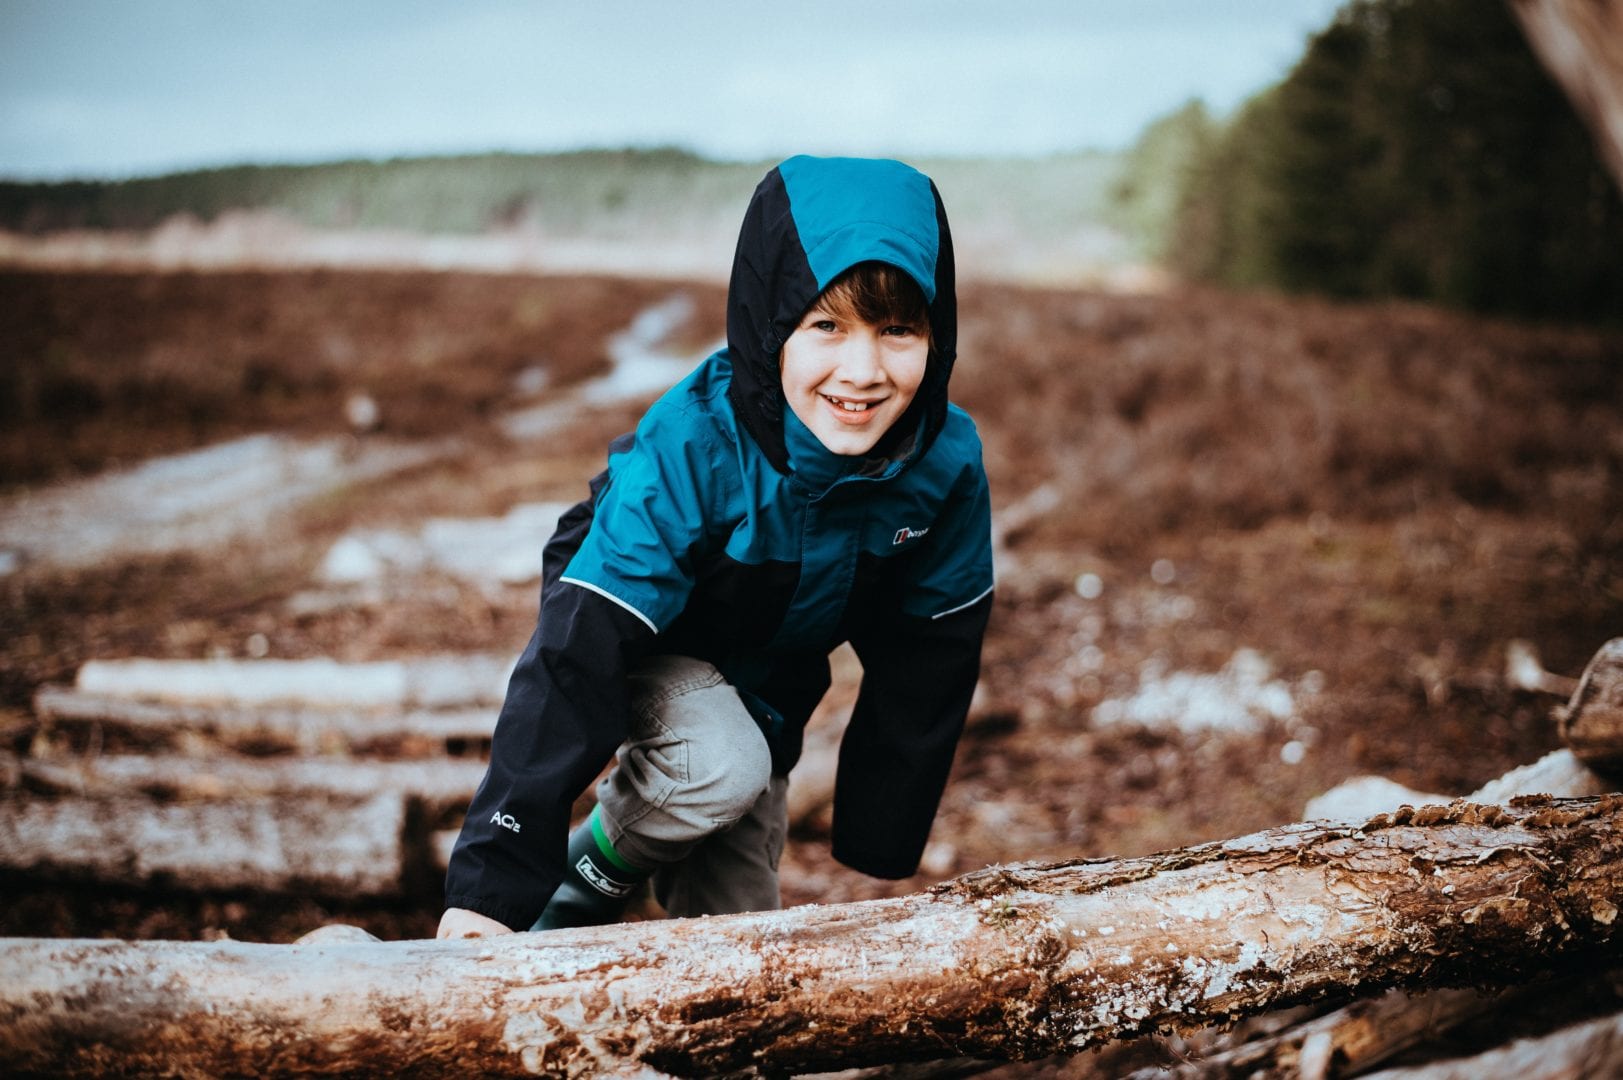 Hiking With Kids: 5 Expert Tips for Making It Fun for Everyone